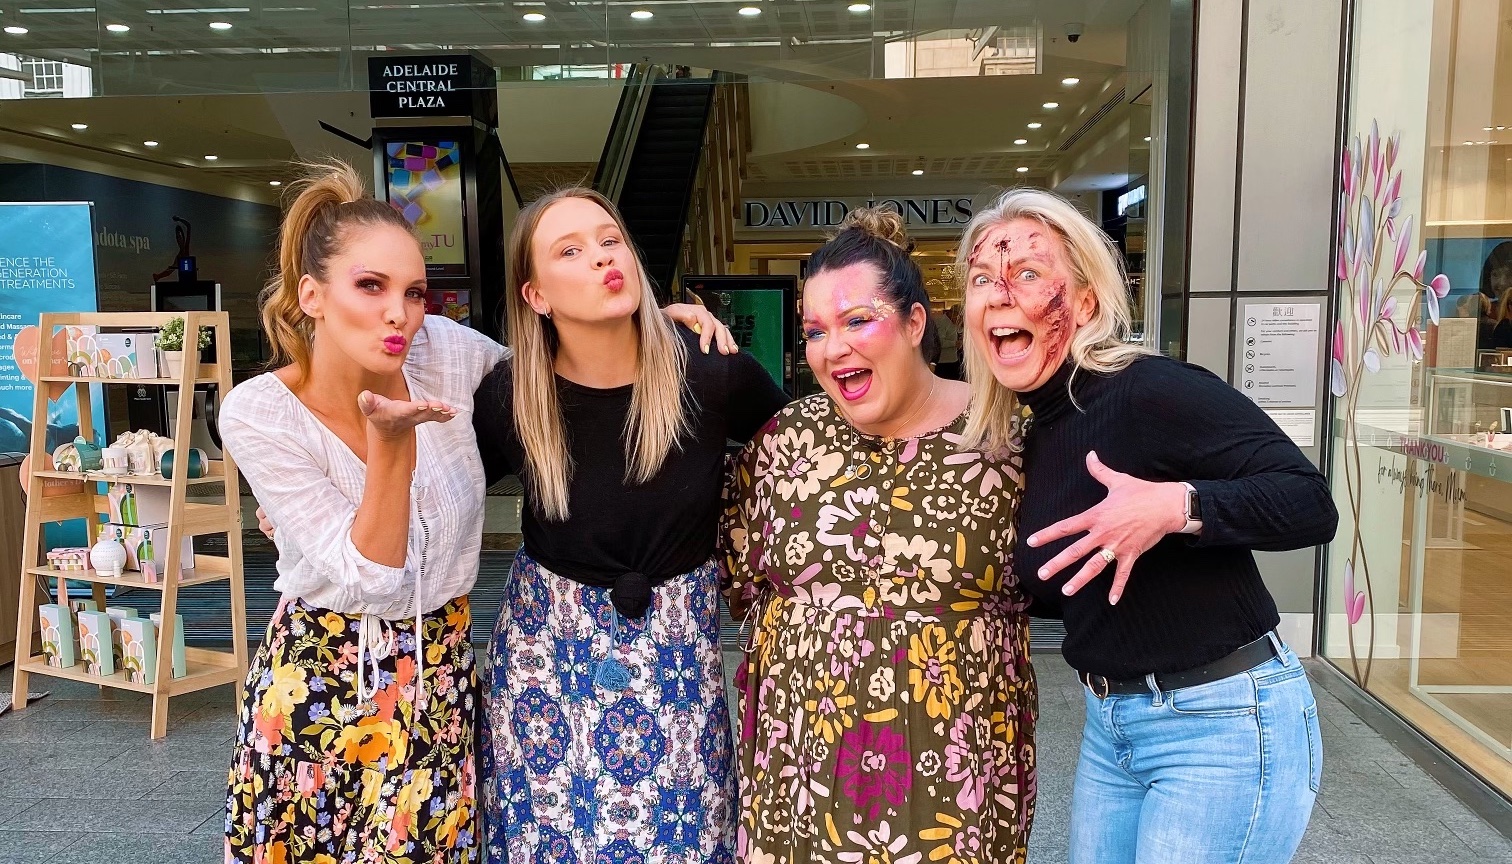 WIN a makeup experience at Kyrolan and lunch, thanks to Adelaide Central Plaza!